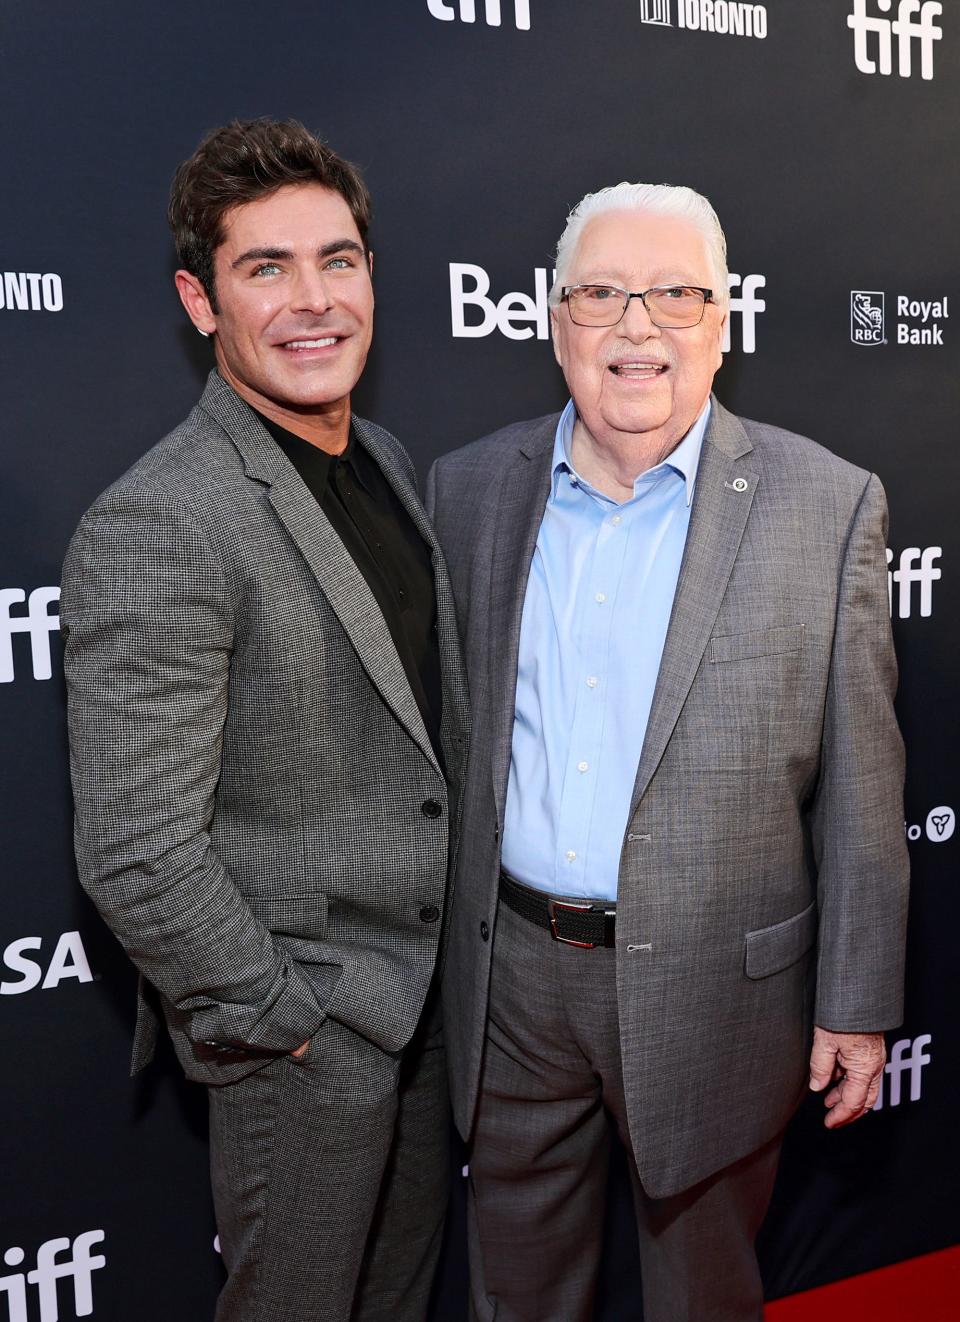 Zac Efron (left) and John "Chickie" Donohue attend "The Greatest Beer Run Ever" premiere at the 2022 Toronto International Film Festival.